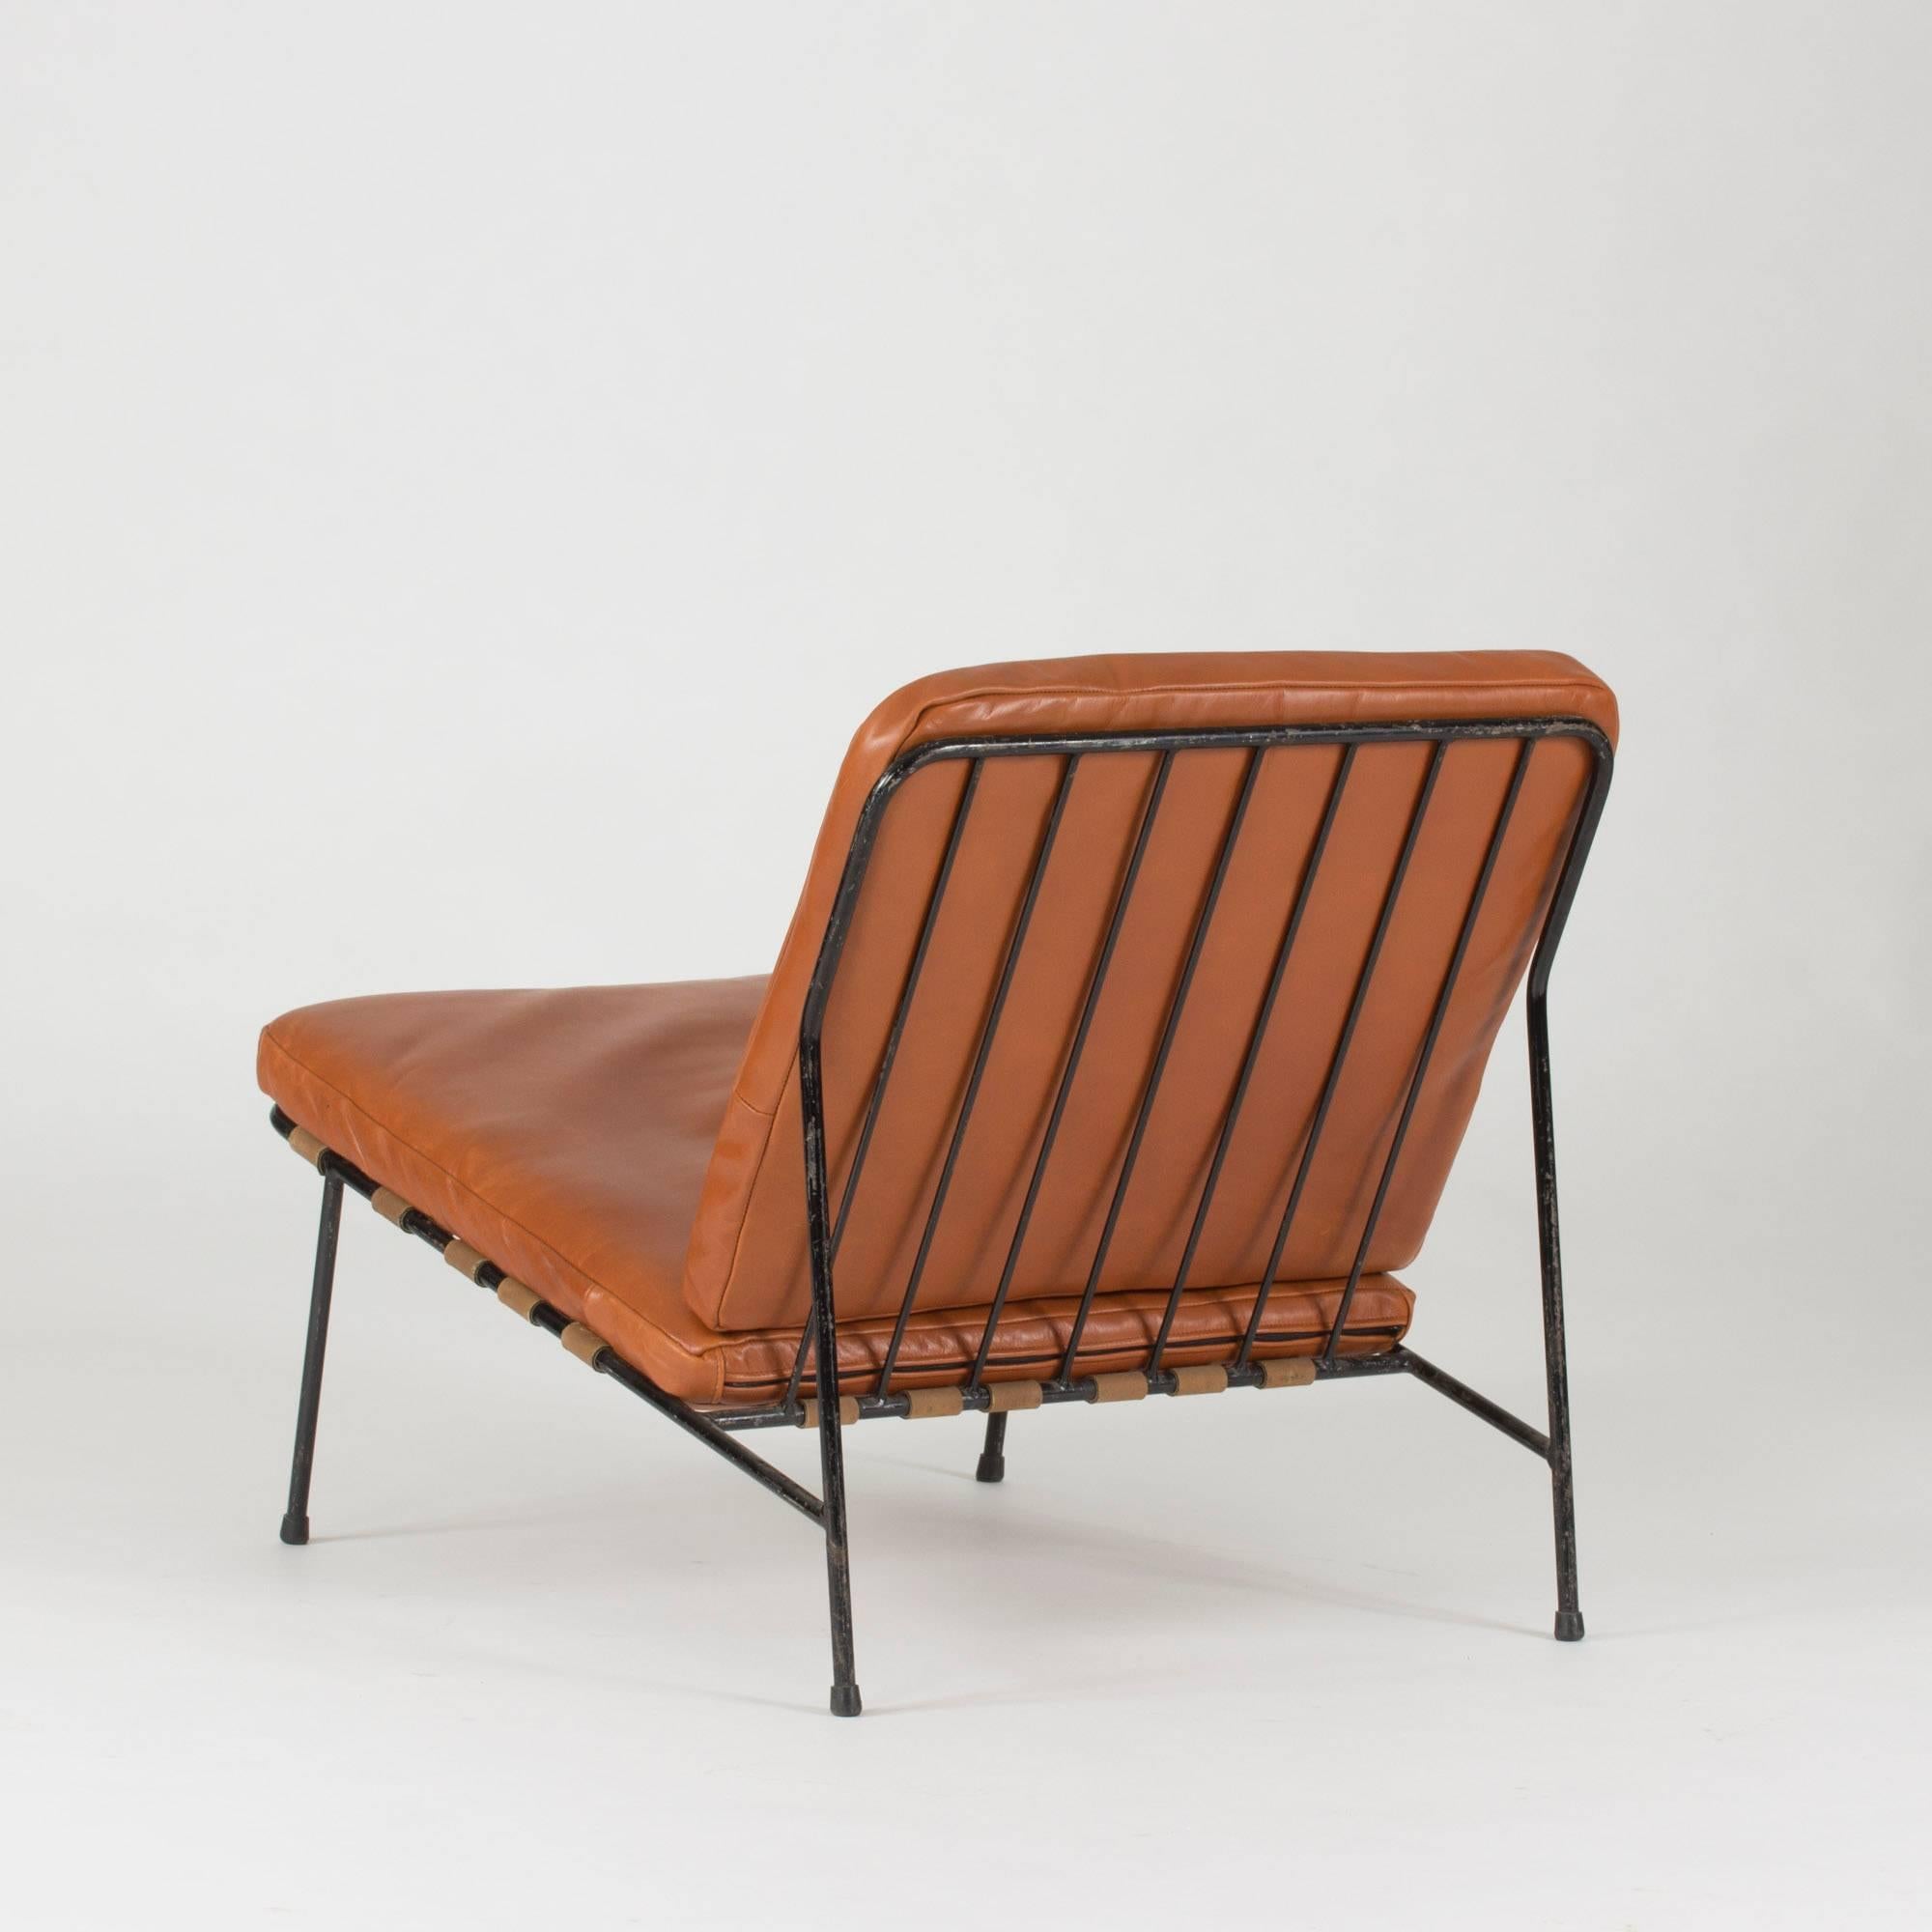 Swedish Leather Lounge Chair by Alf Svensson